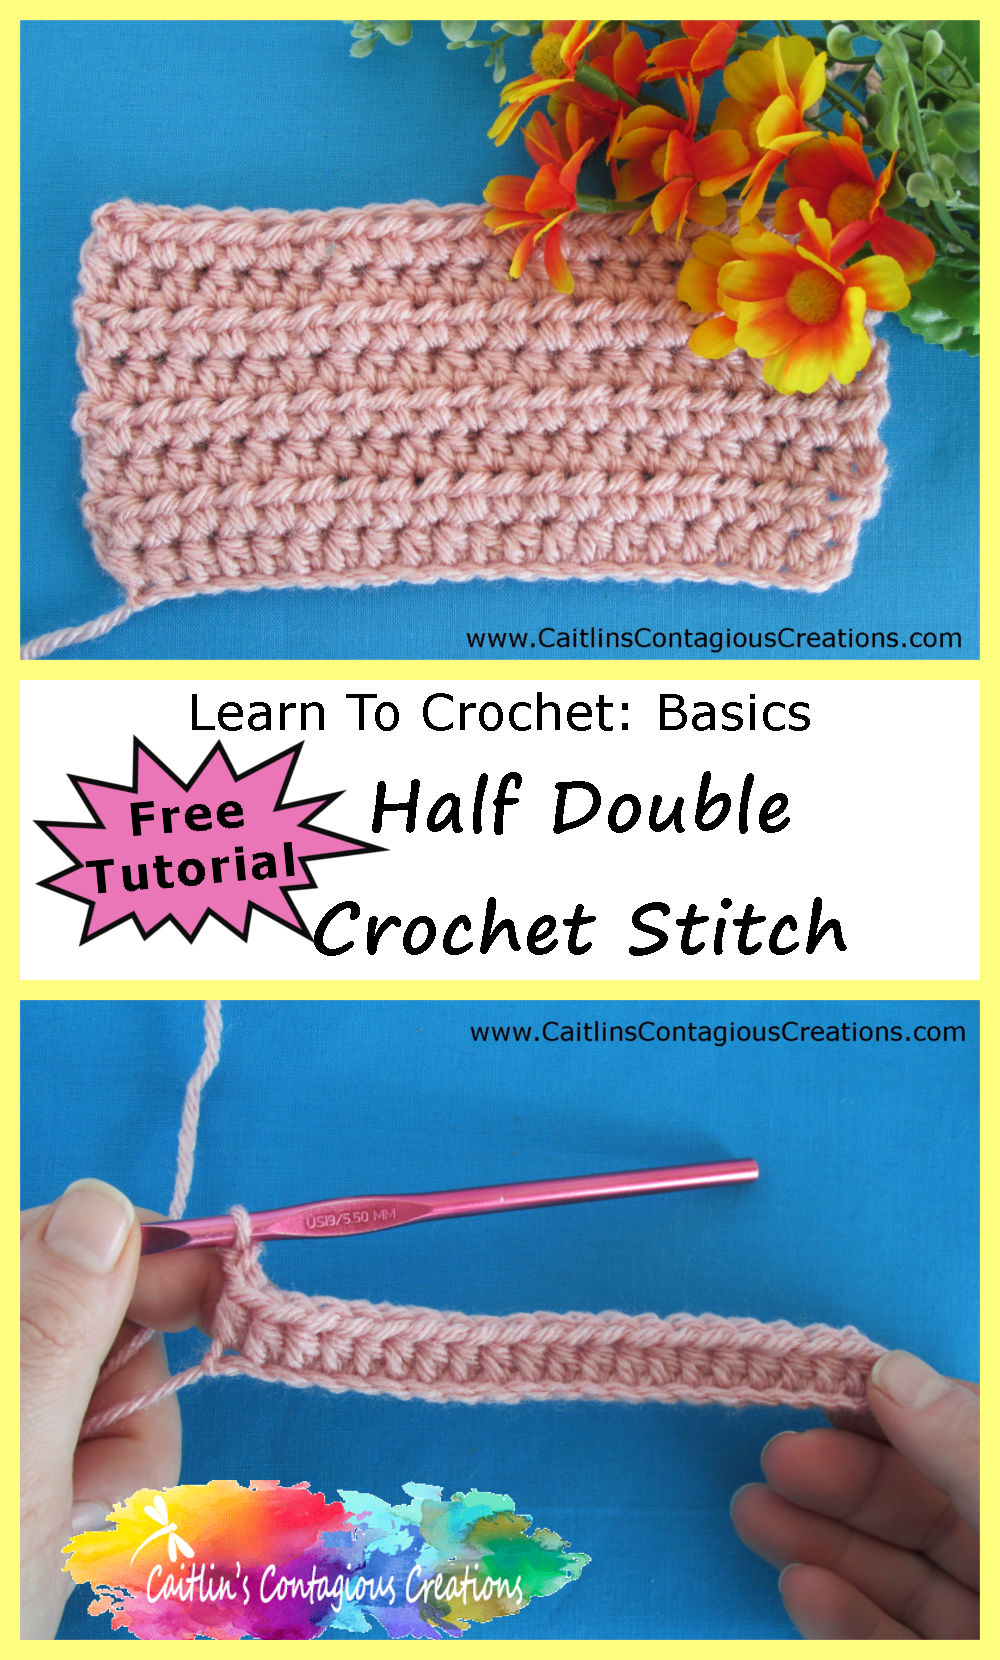 Half Double Crochet Stitch Tutorial from Caitlin's Contagious Creations.  A free, easy to understand HDC stich lesson with written directions and photo instructions to help any beginner learn a basic stitch.